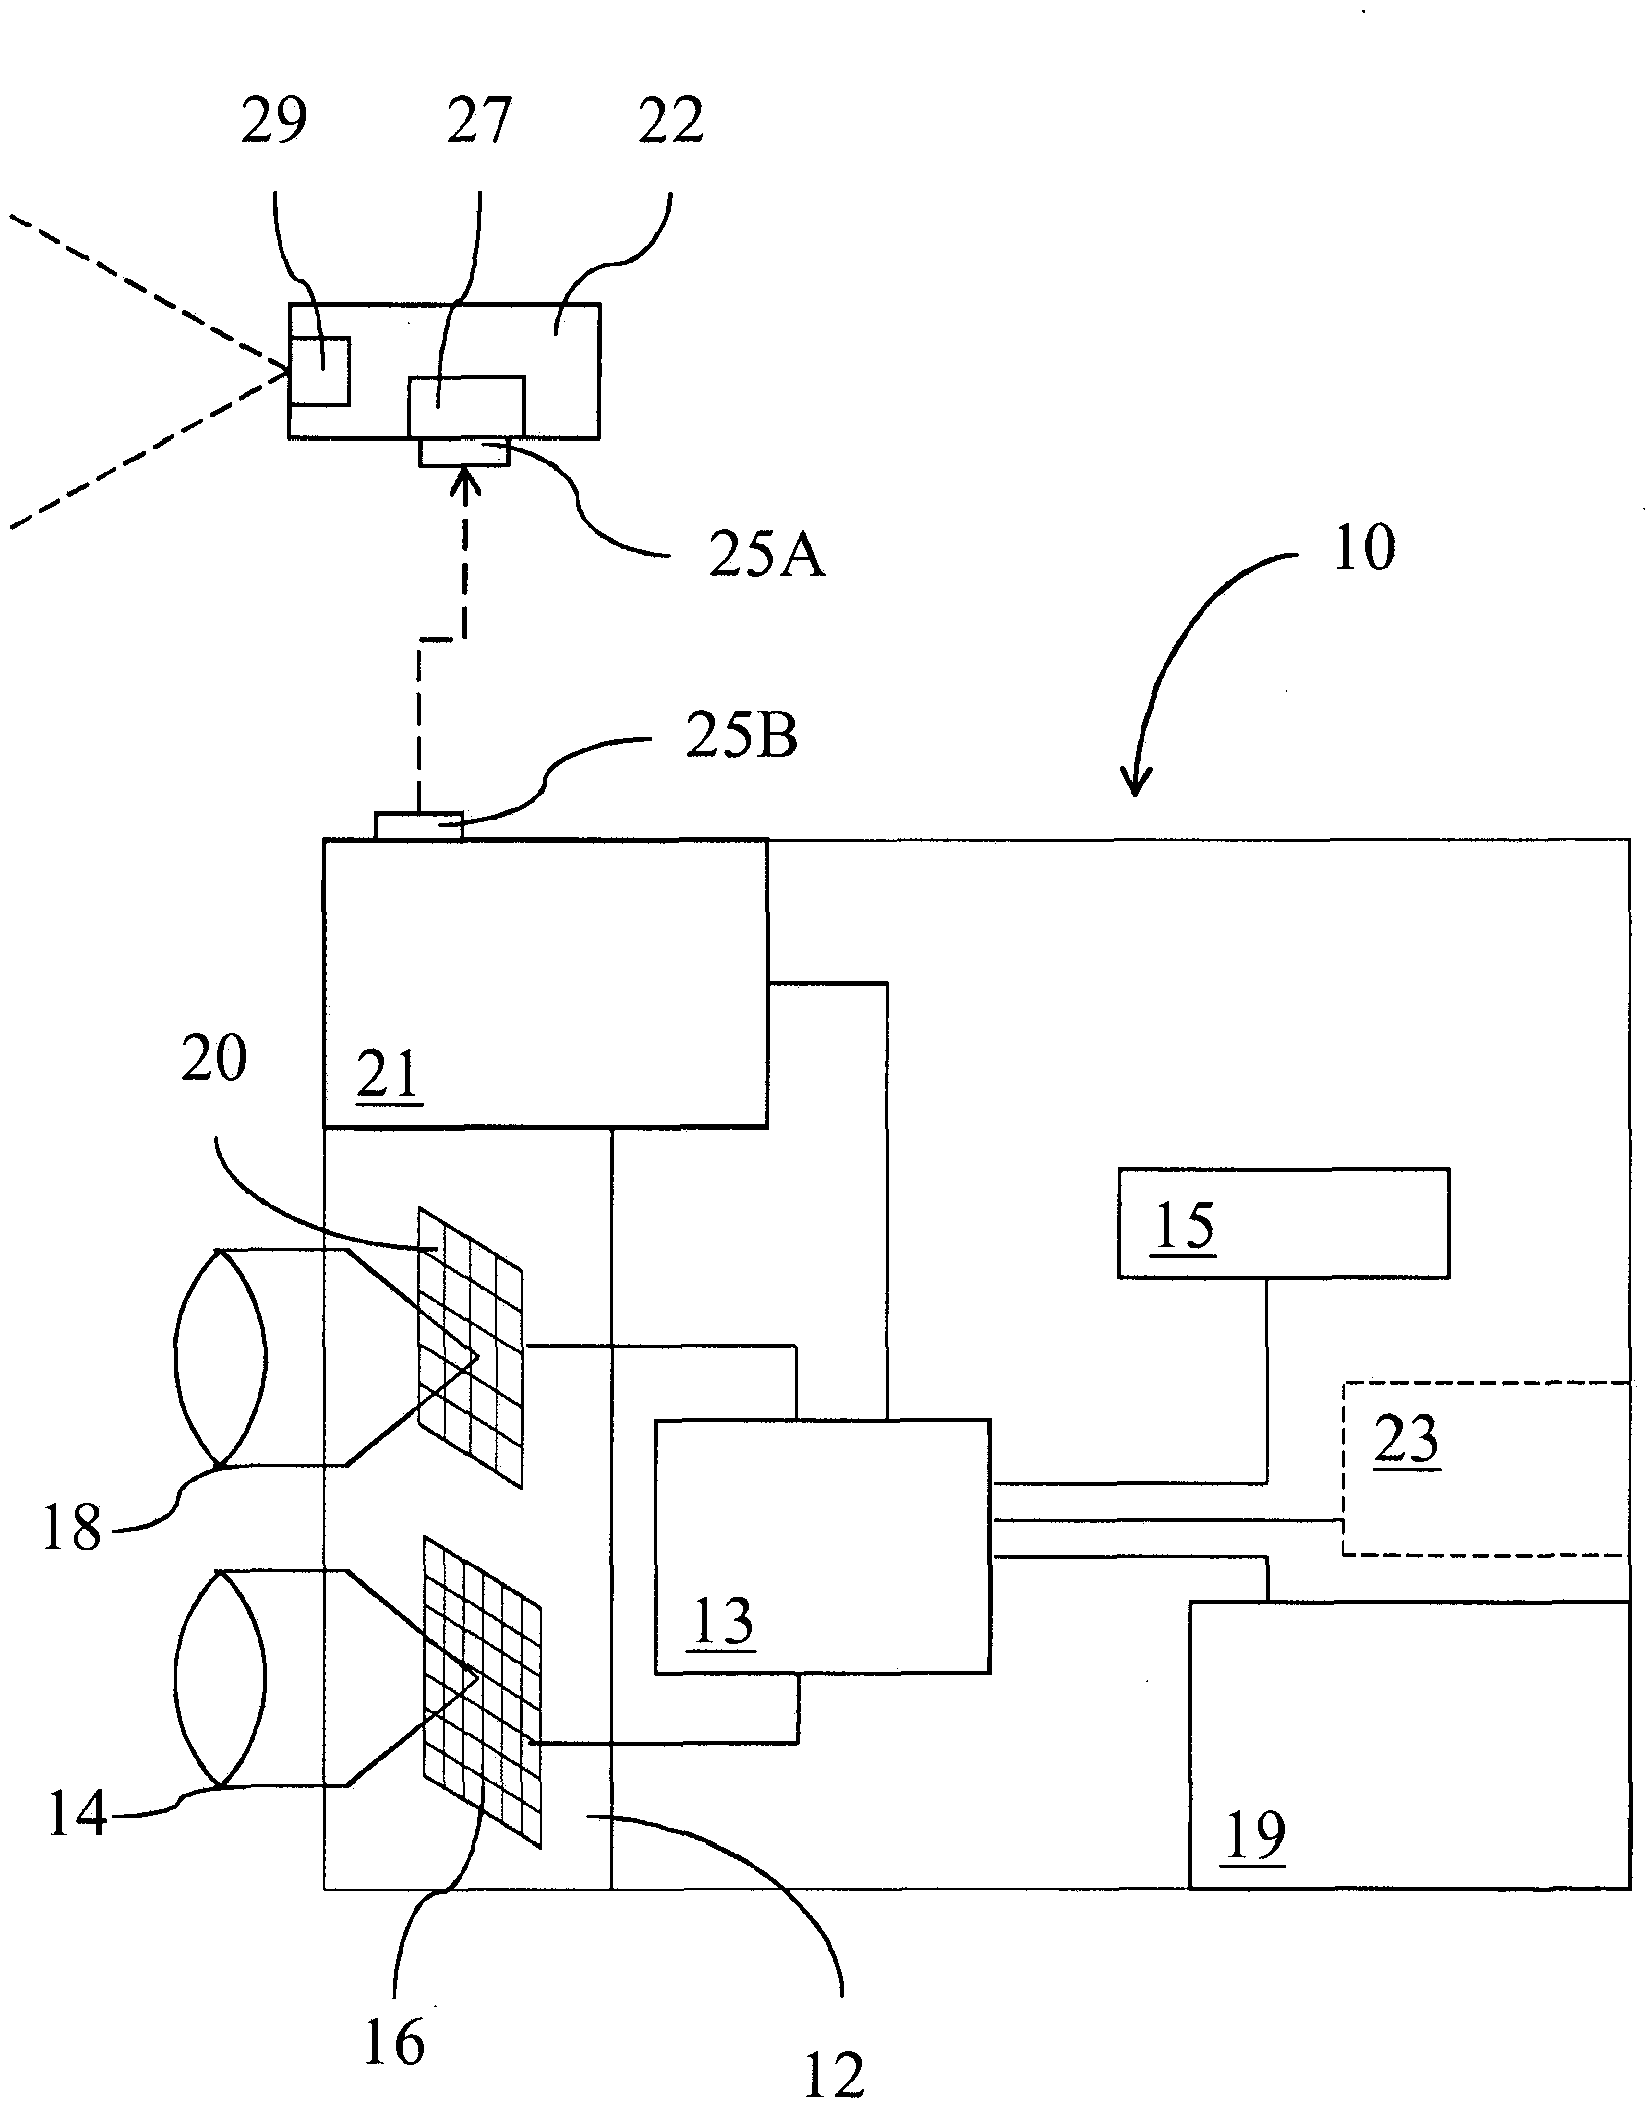 A method and system for projecting a visible representation of infrared radiation